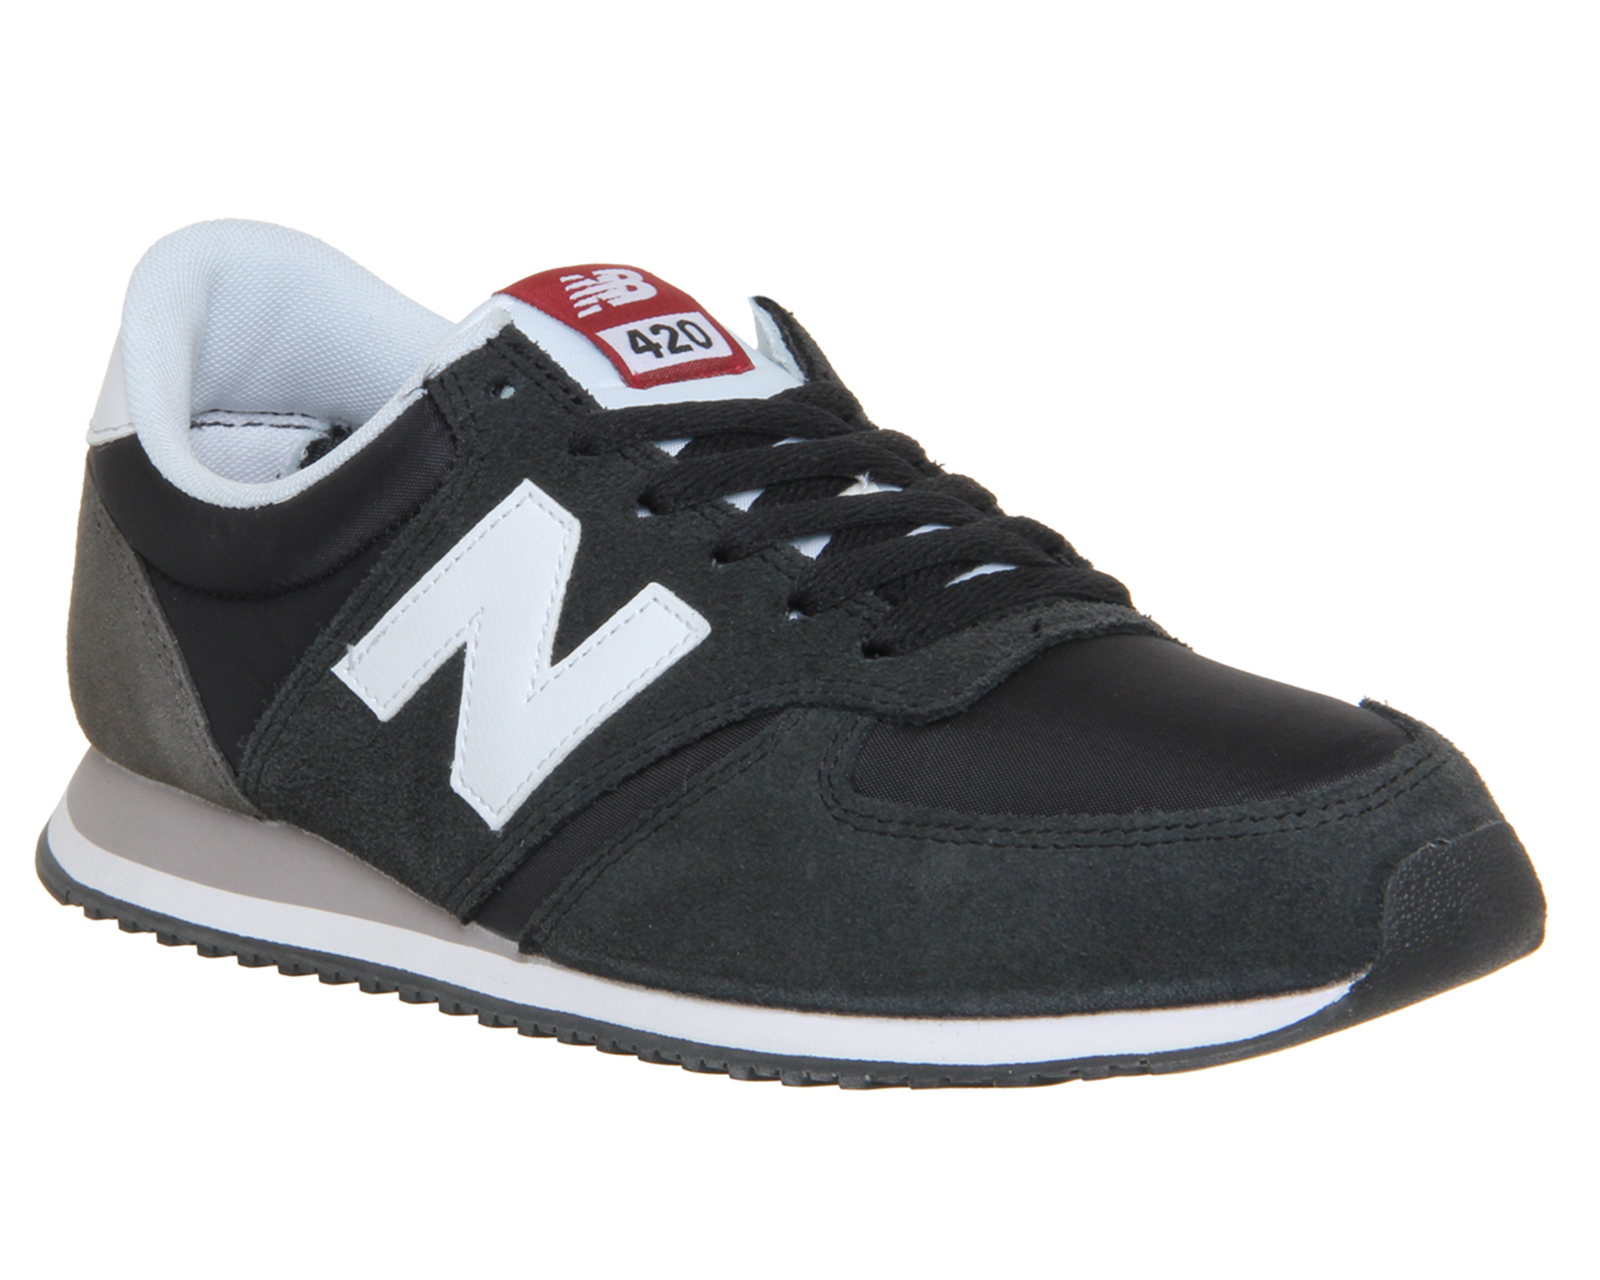 new balance 420 grey and black suede trainers